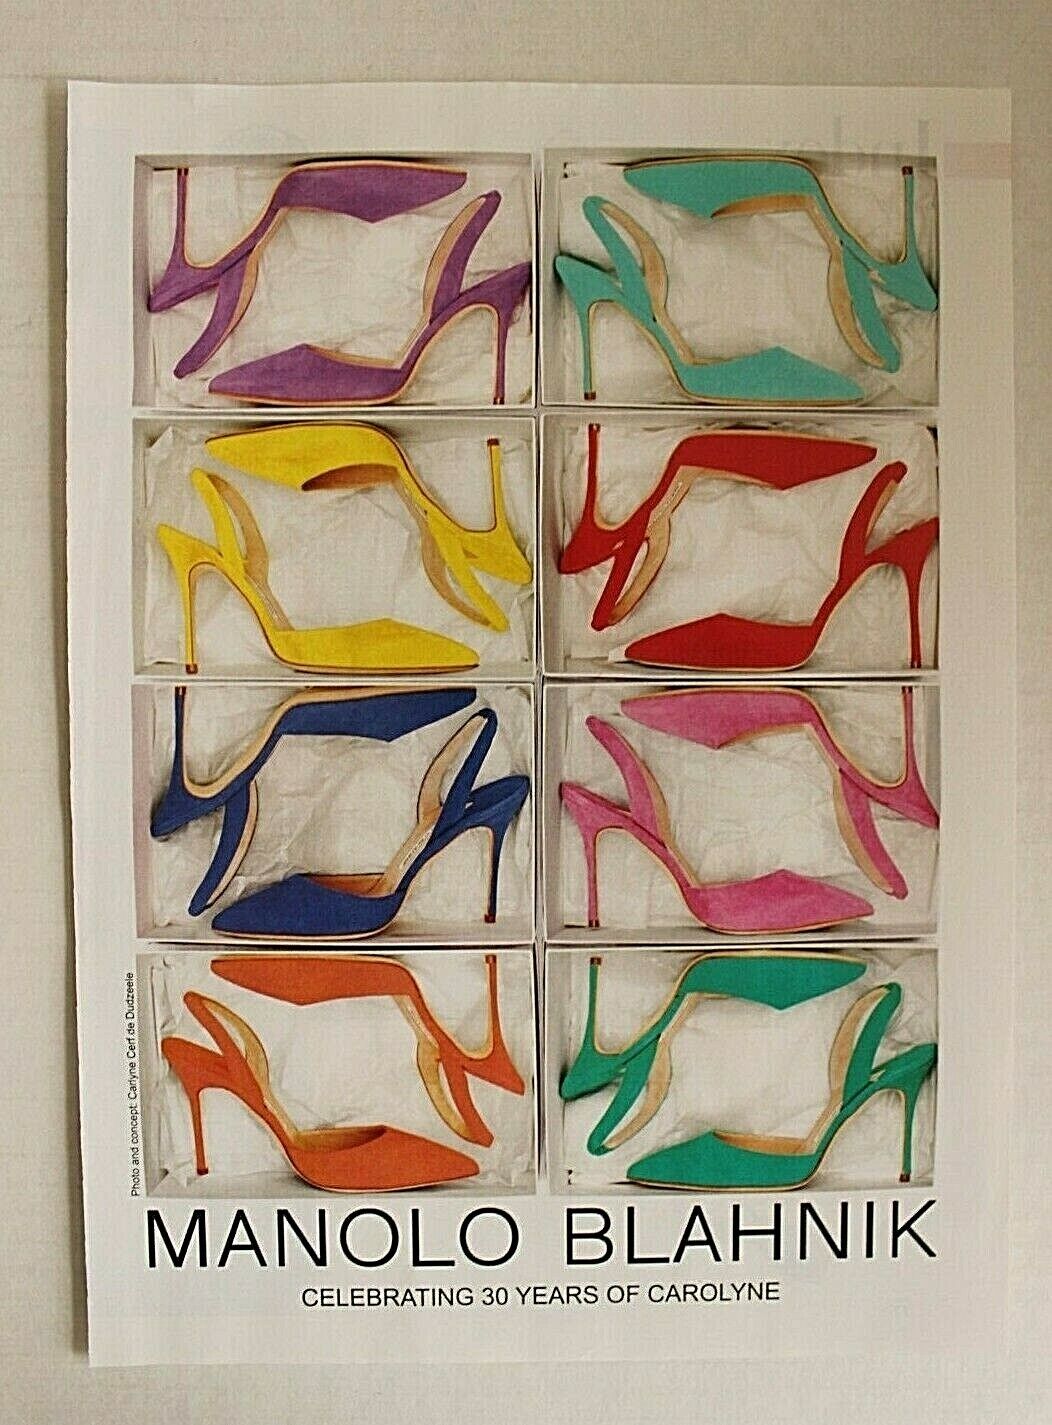 Manolo Blahnik 30yrs of Carolyne Colorful Strappy Heels In Boxes 2016 Print Ad